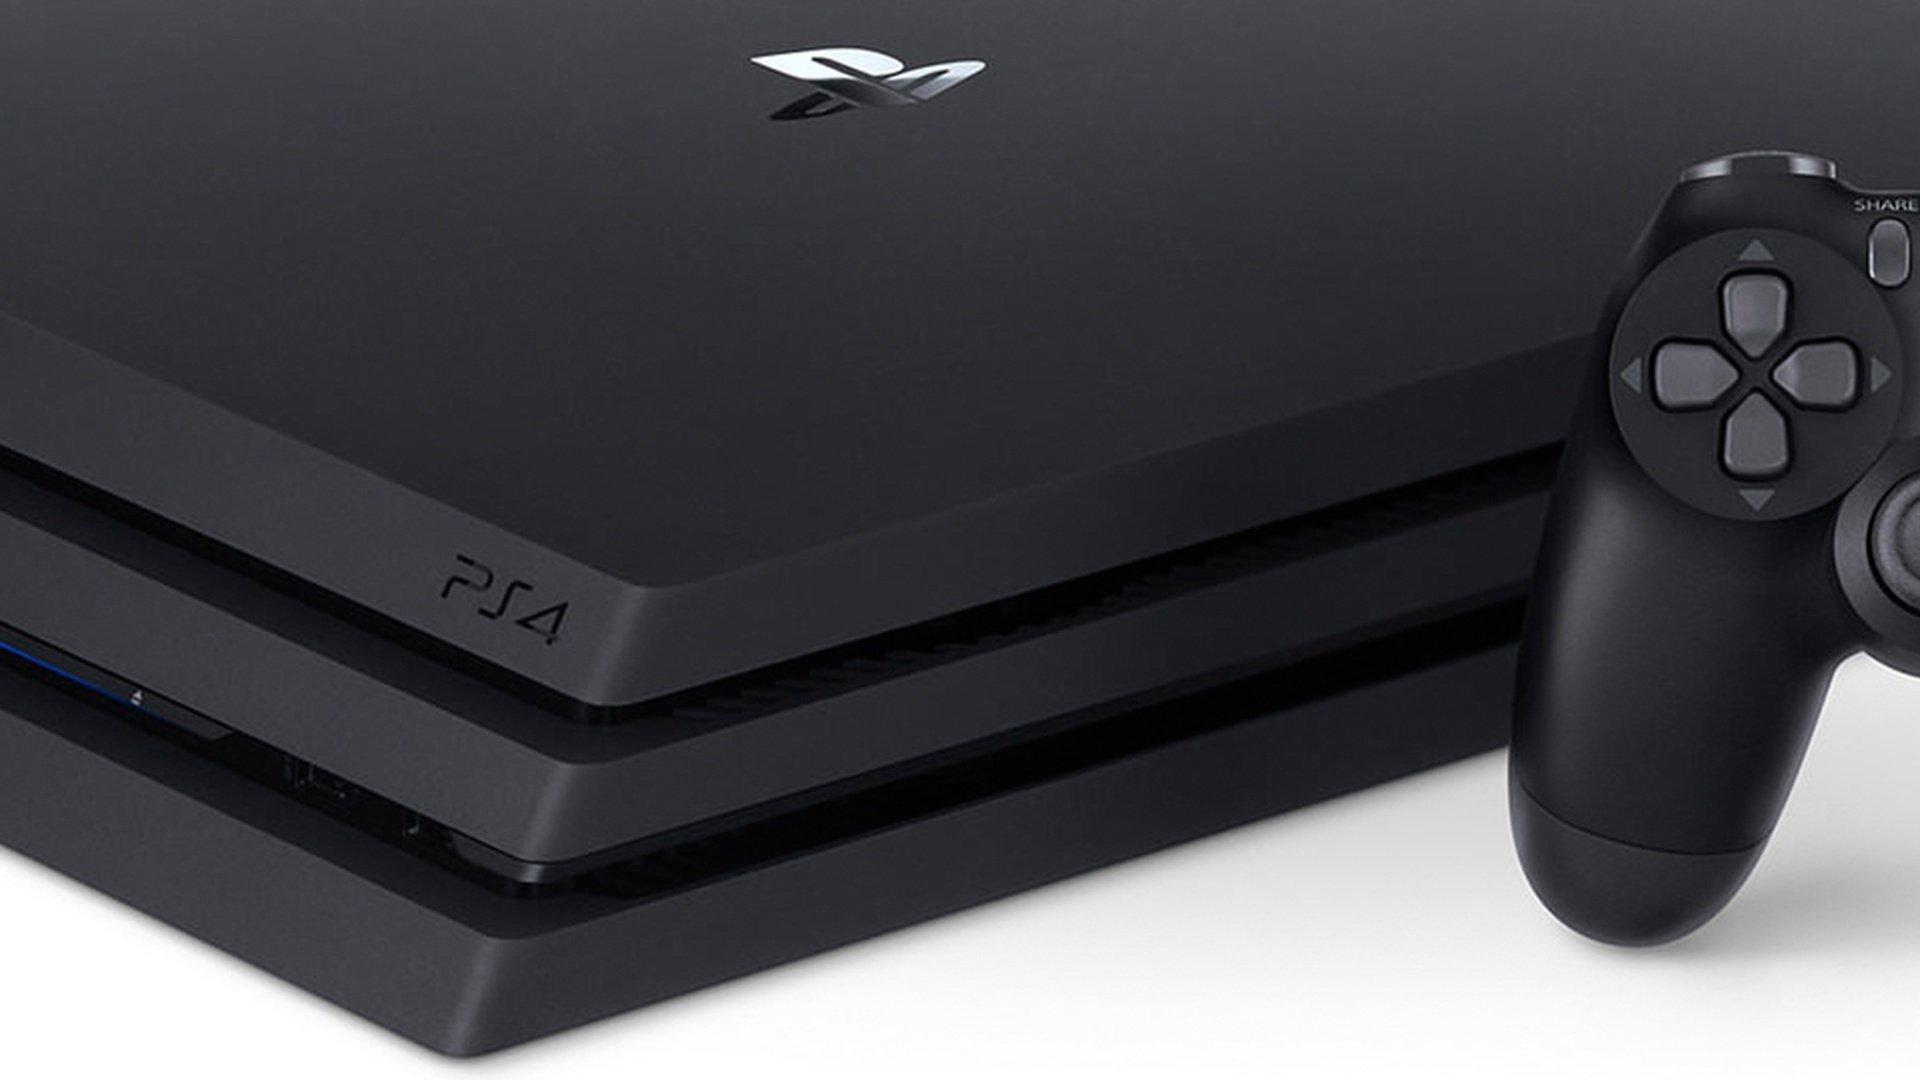 ps4 units sold 2019